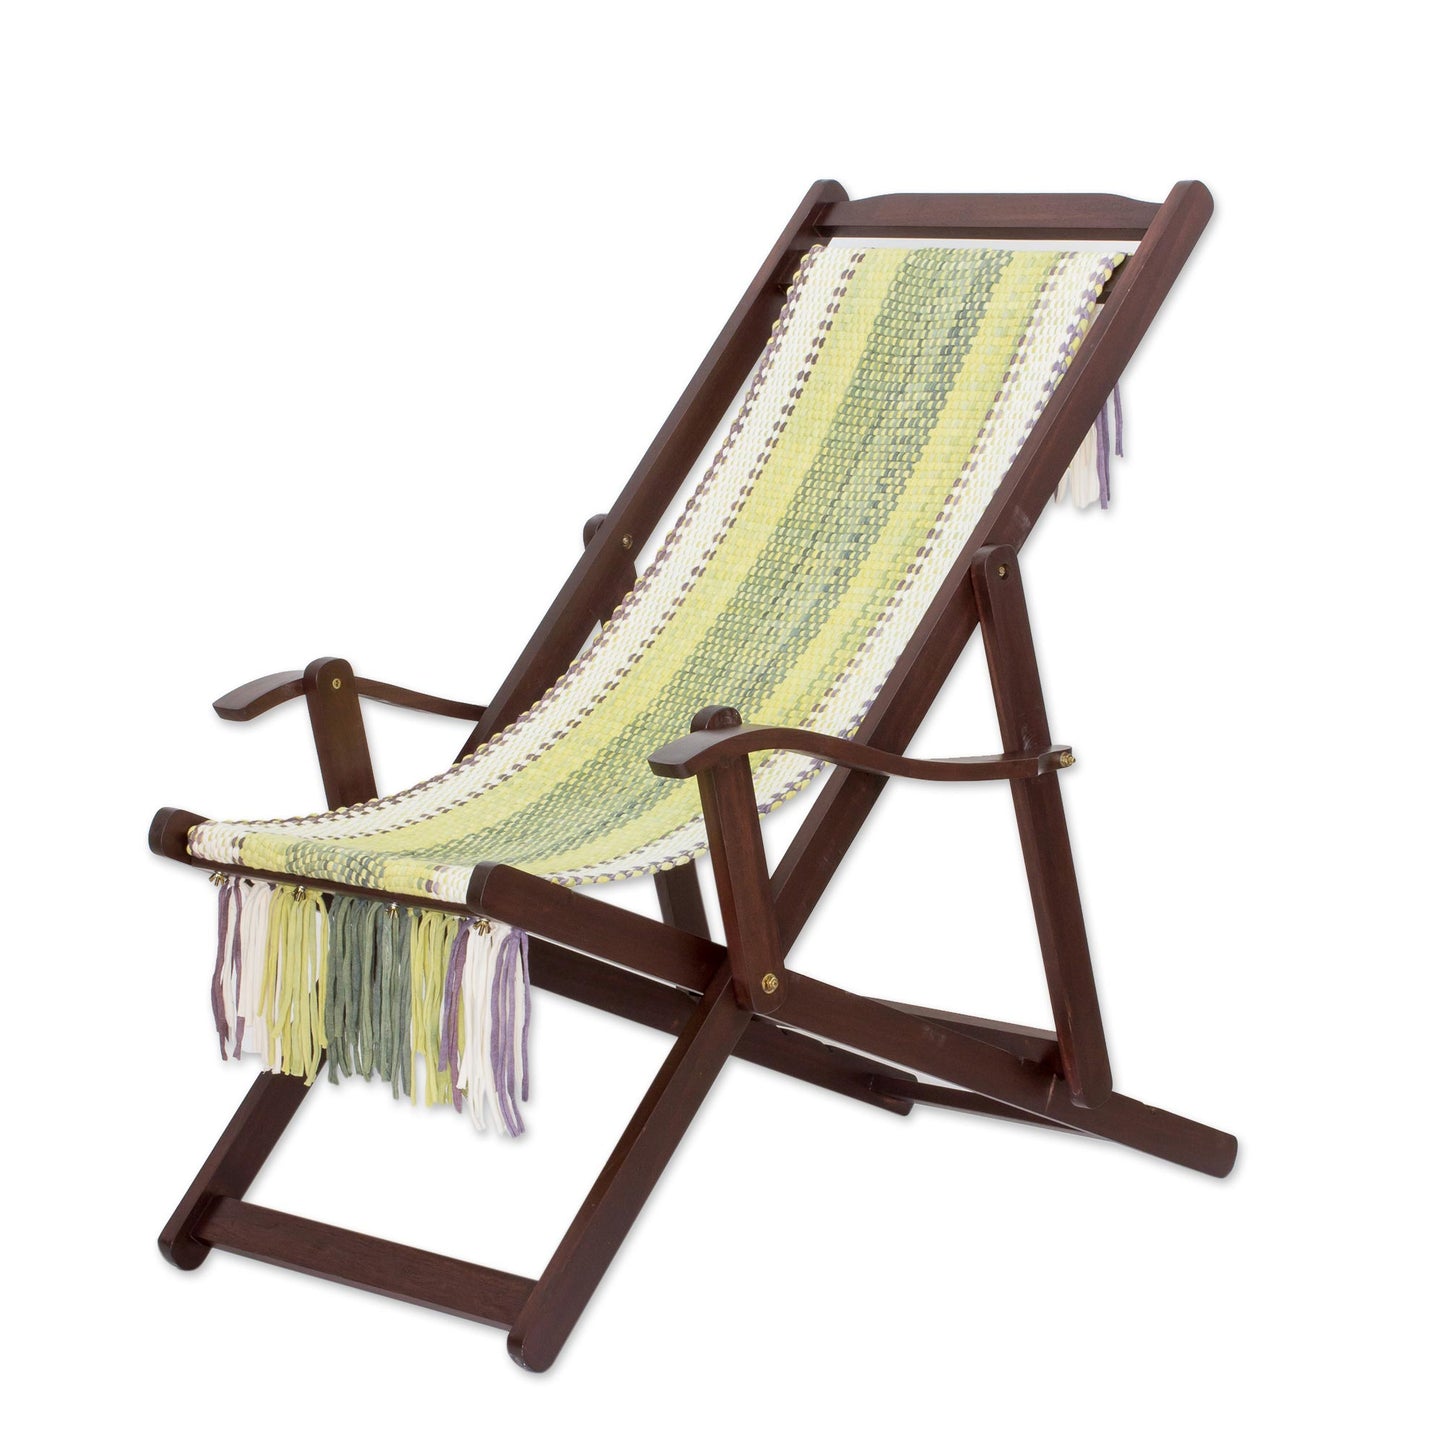 Paradise Fields Adjustable Wood Frame Recycled Cotton Blend Hammock Chair